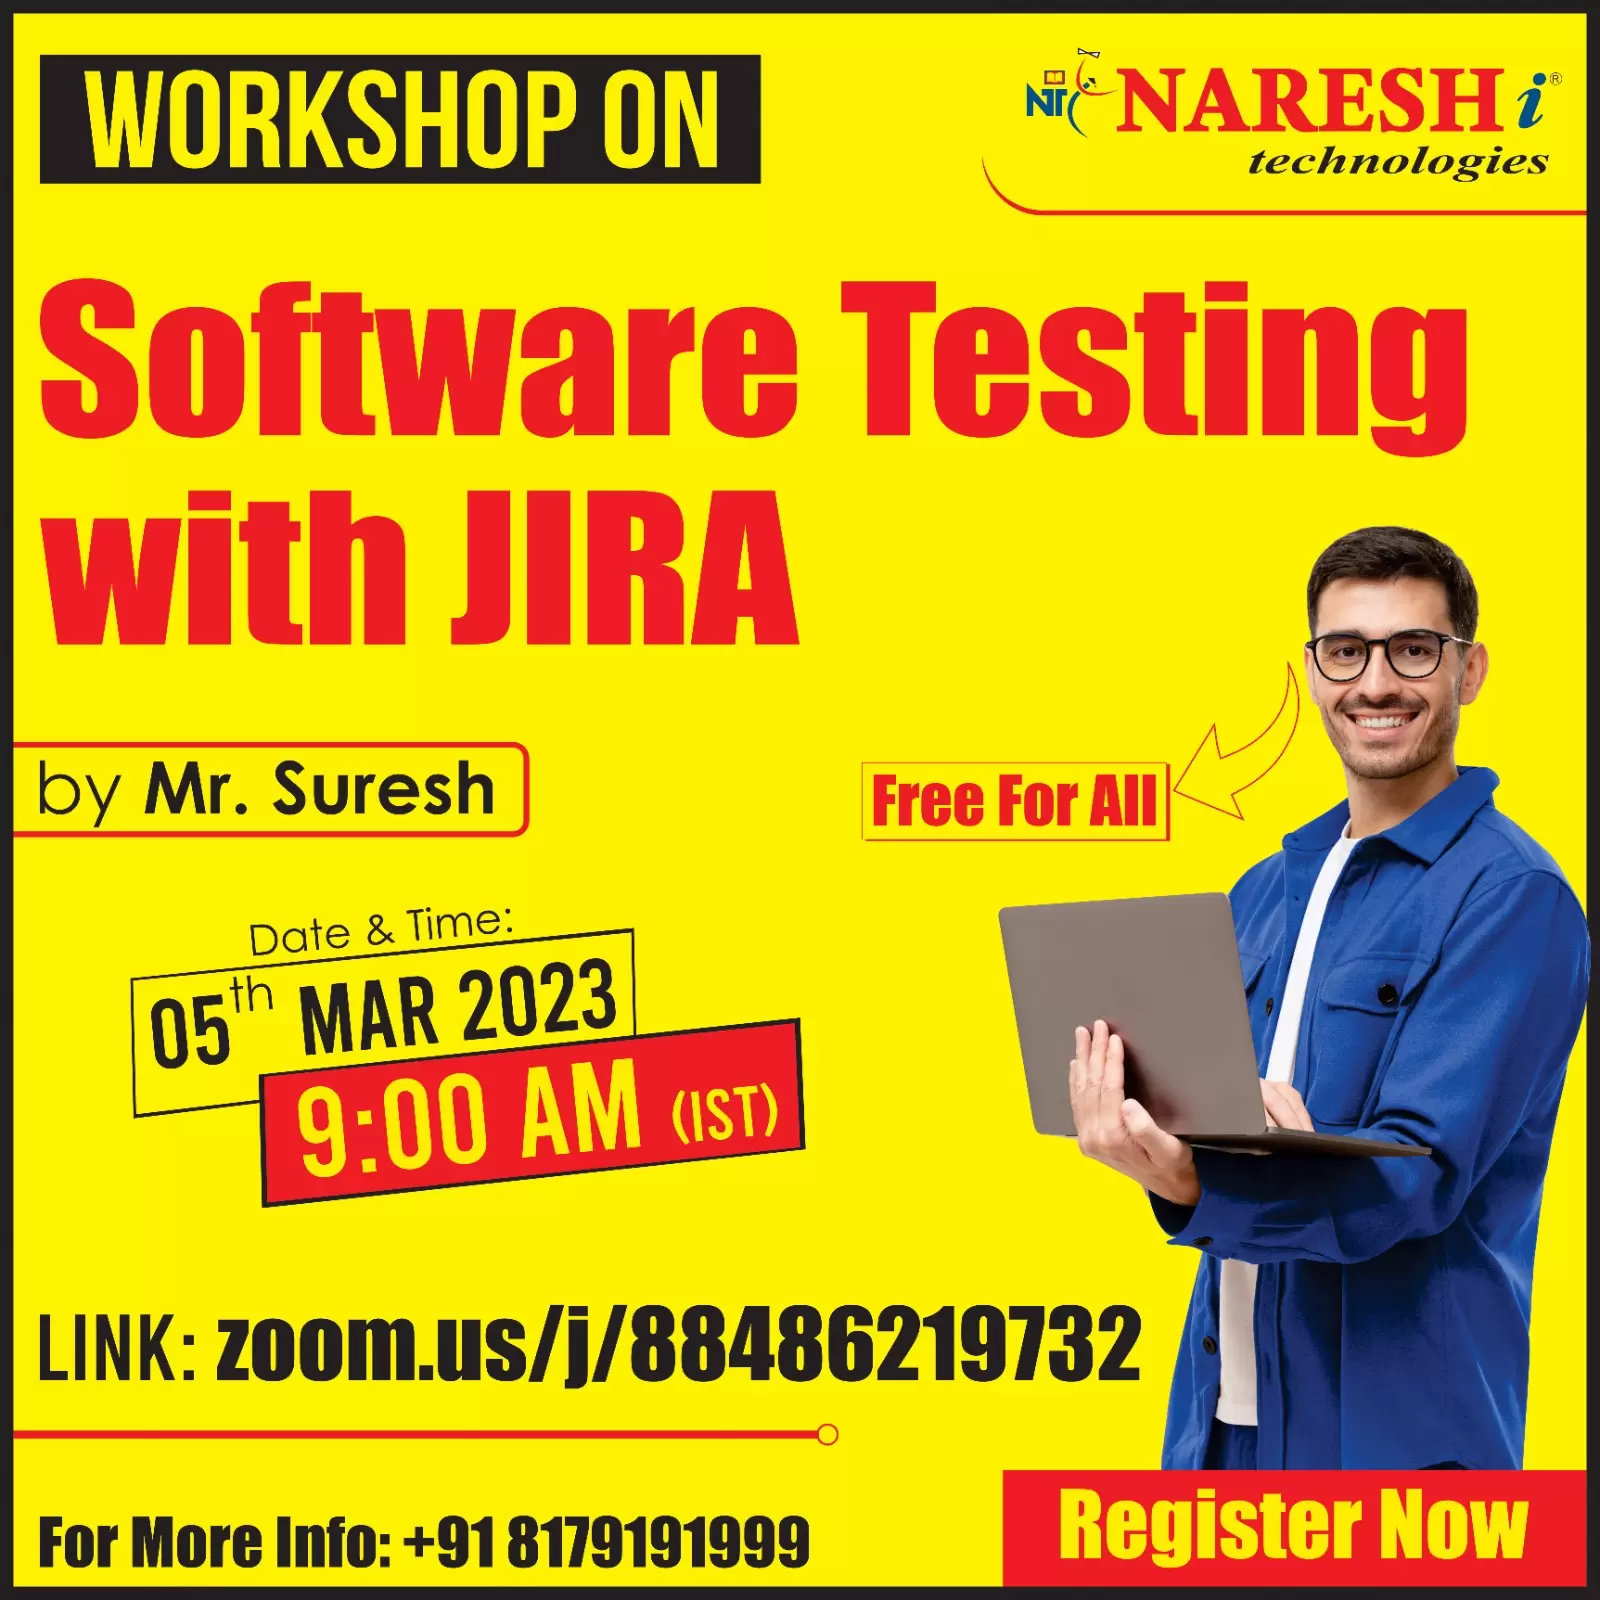 Free Workshop On Software Testing With JIRA By Mr.Suresh-NareshIT